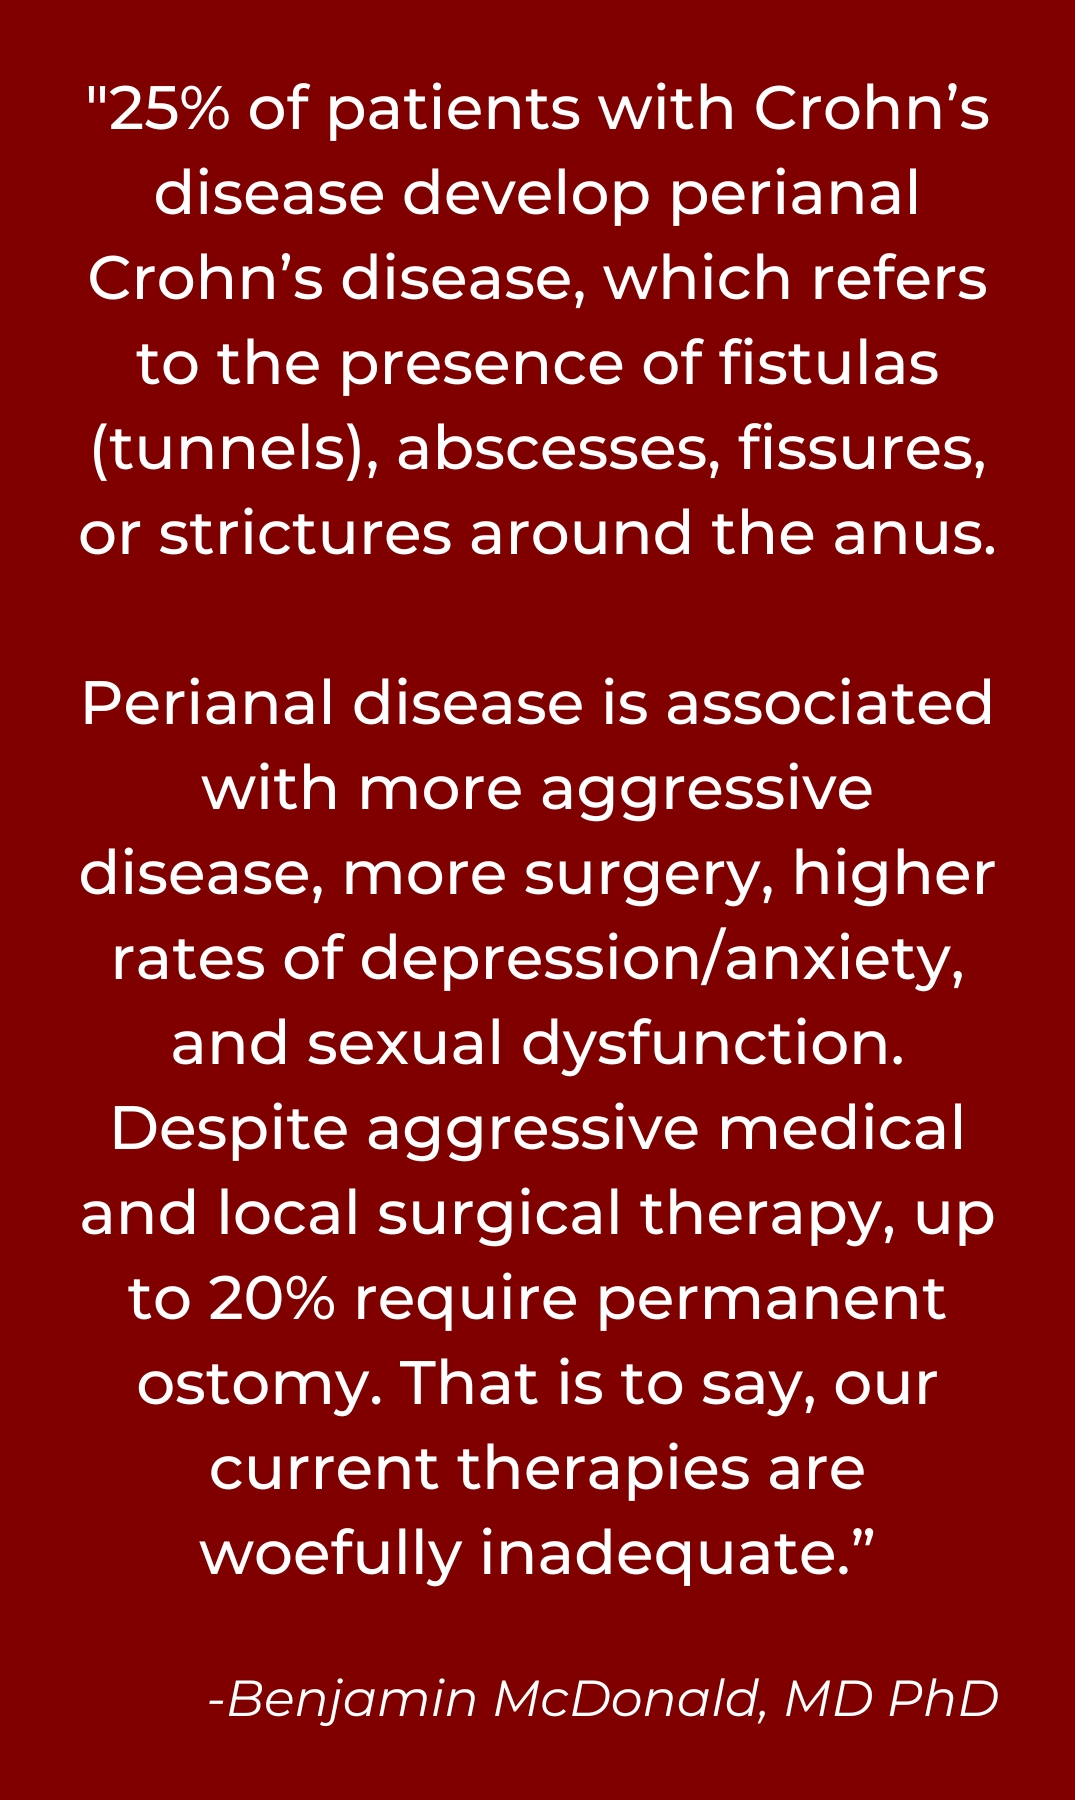 "25% of patients with Crohn’s disease develop perianal Crohn’s disease, which refers to the presence of fistulas (tunnels), abscesses, fissures, or strictures around the anus. </p>
<p>Perianal disease is associated with more aggressive disease, more surgery, higher rates of depression/anxiety, and sexual dysfunction. Despite aggressive medical and local surgical therapy, up to 20% require permanent ostomy. That is to say, our current therapies are woefully inadequate.”